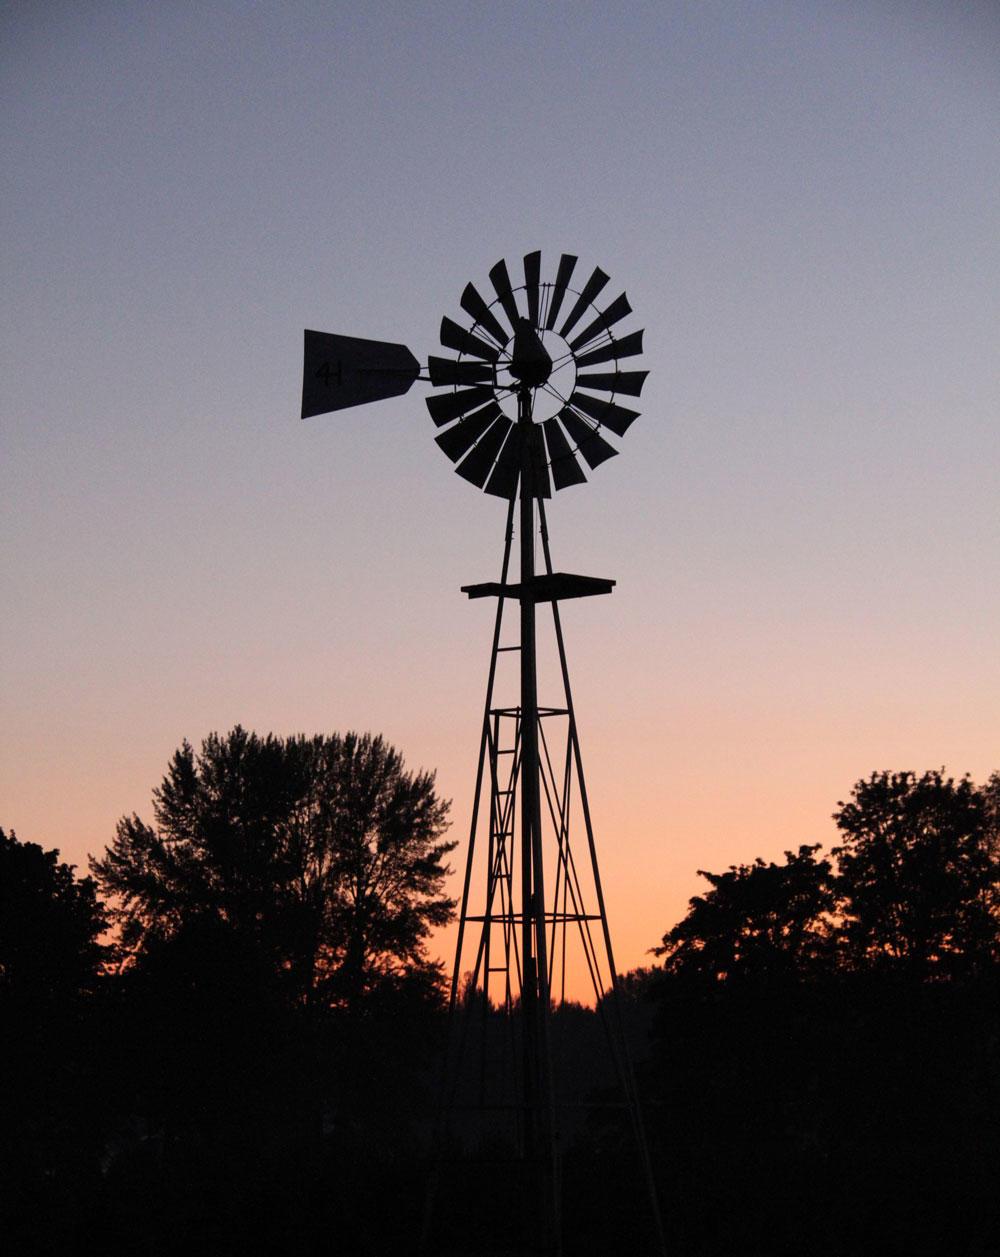 The silhouette of an Oregon farm's windmill is visible against the sky.